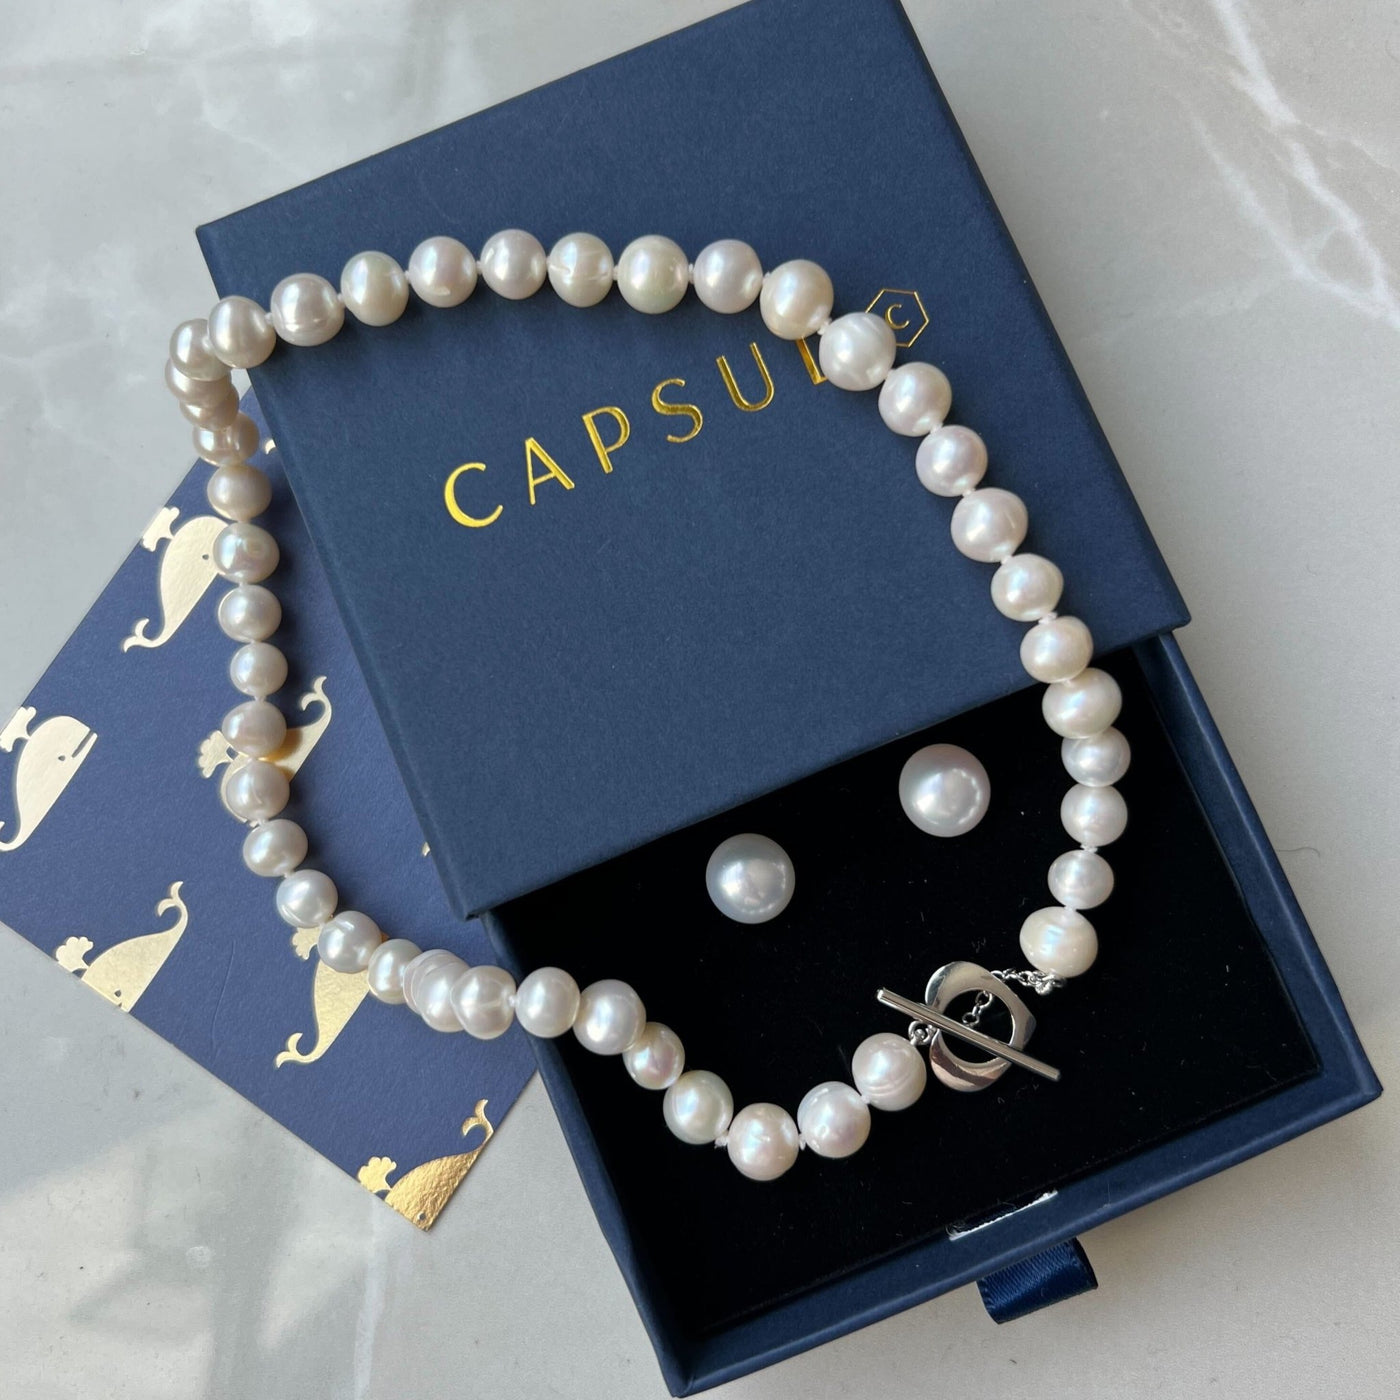 Freshwater Pearls Necklace with Heart Toggle Clasp and Earrings set - Capsul